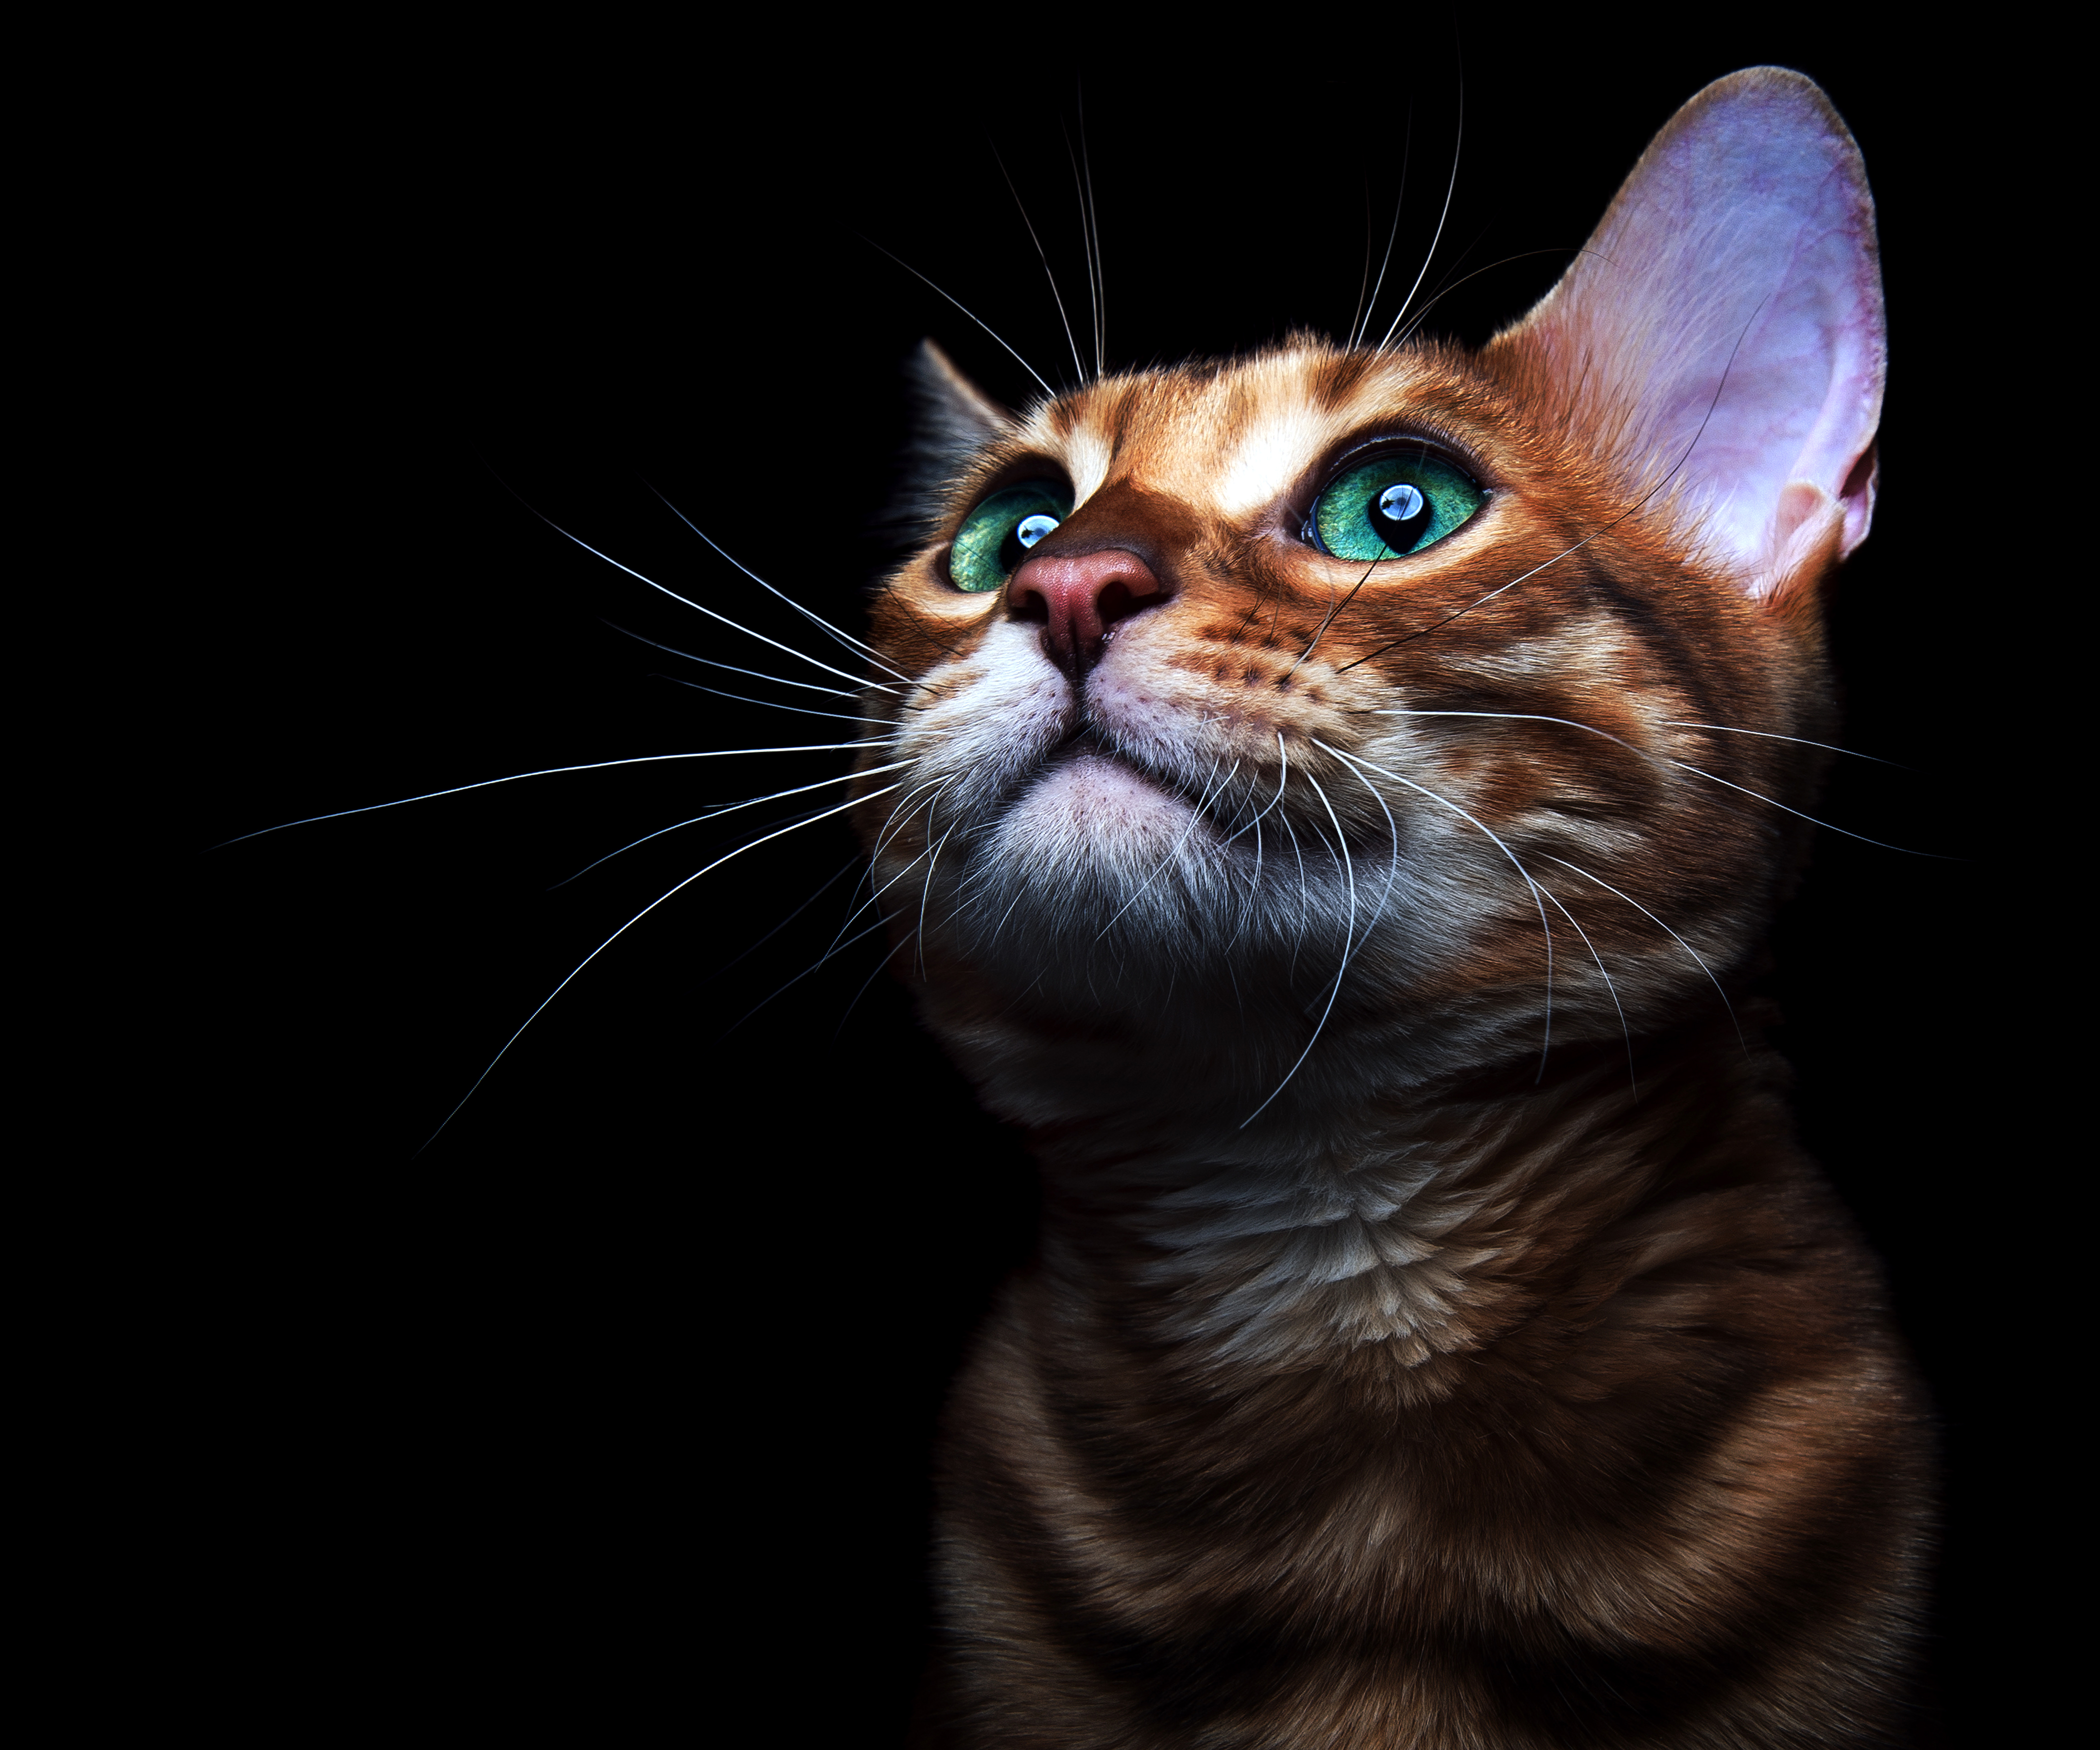 1700+ 4K Cat Wallpapers | Background Images